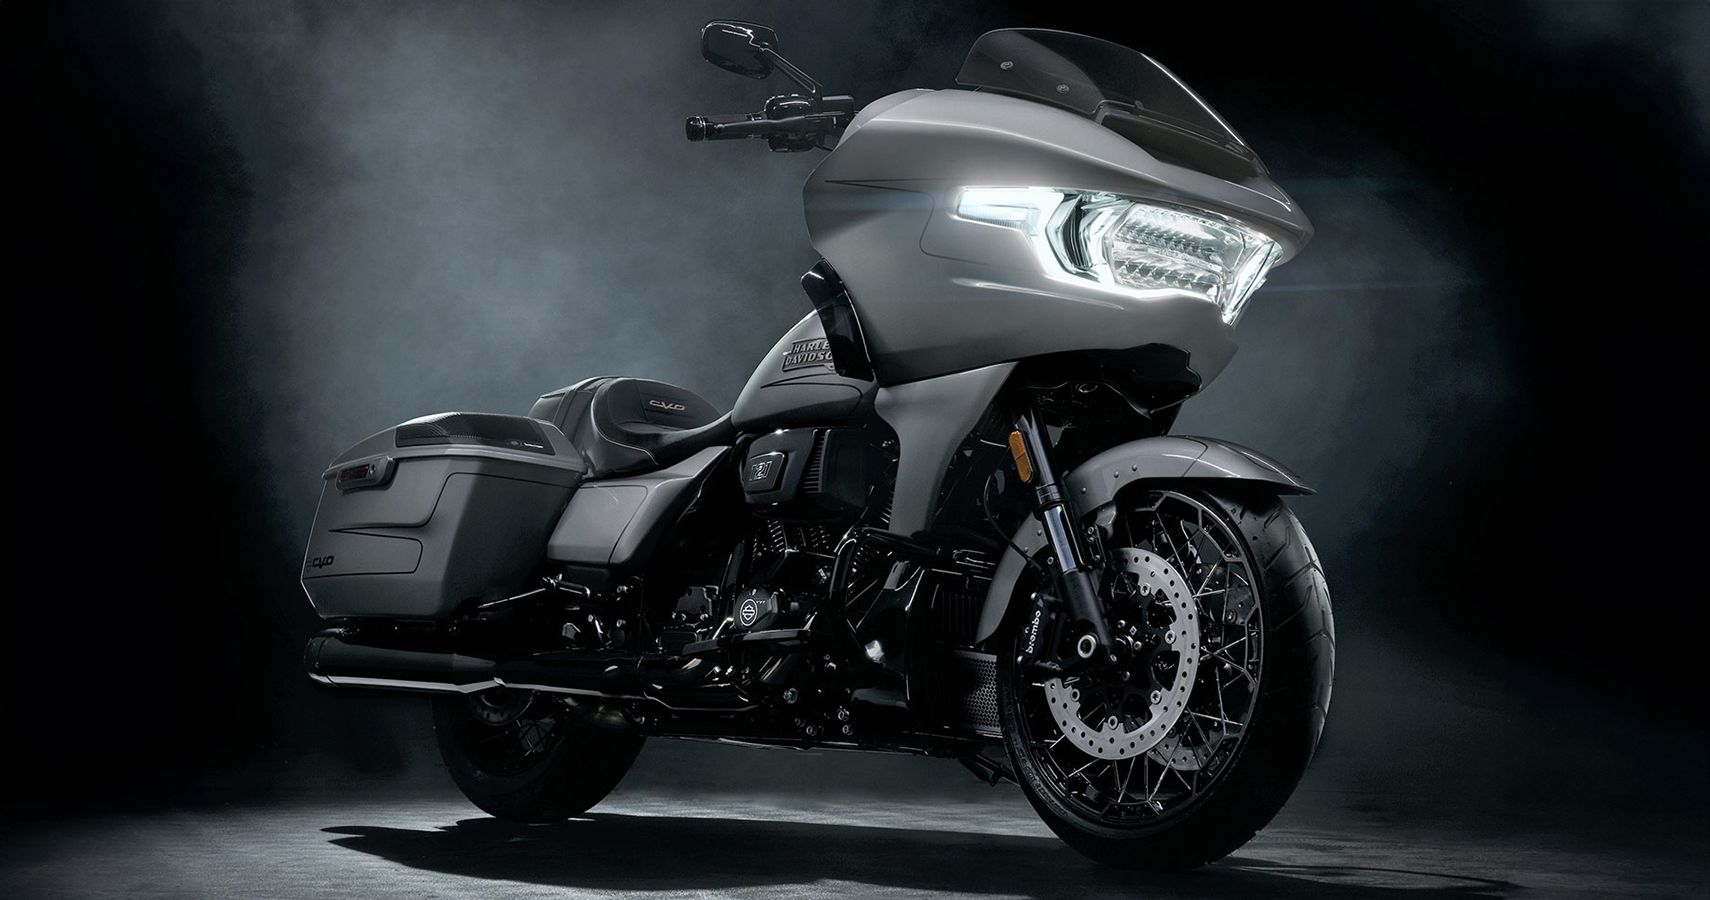 10 Reasons Why Every Biker Should Ride One Of The 2022 Harley